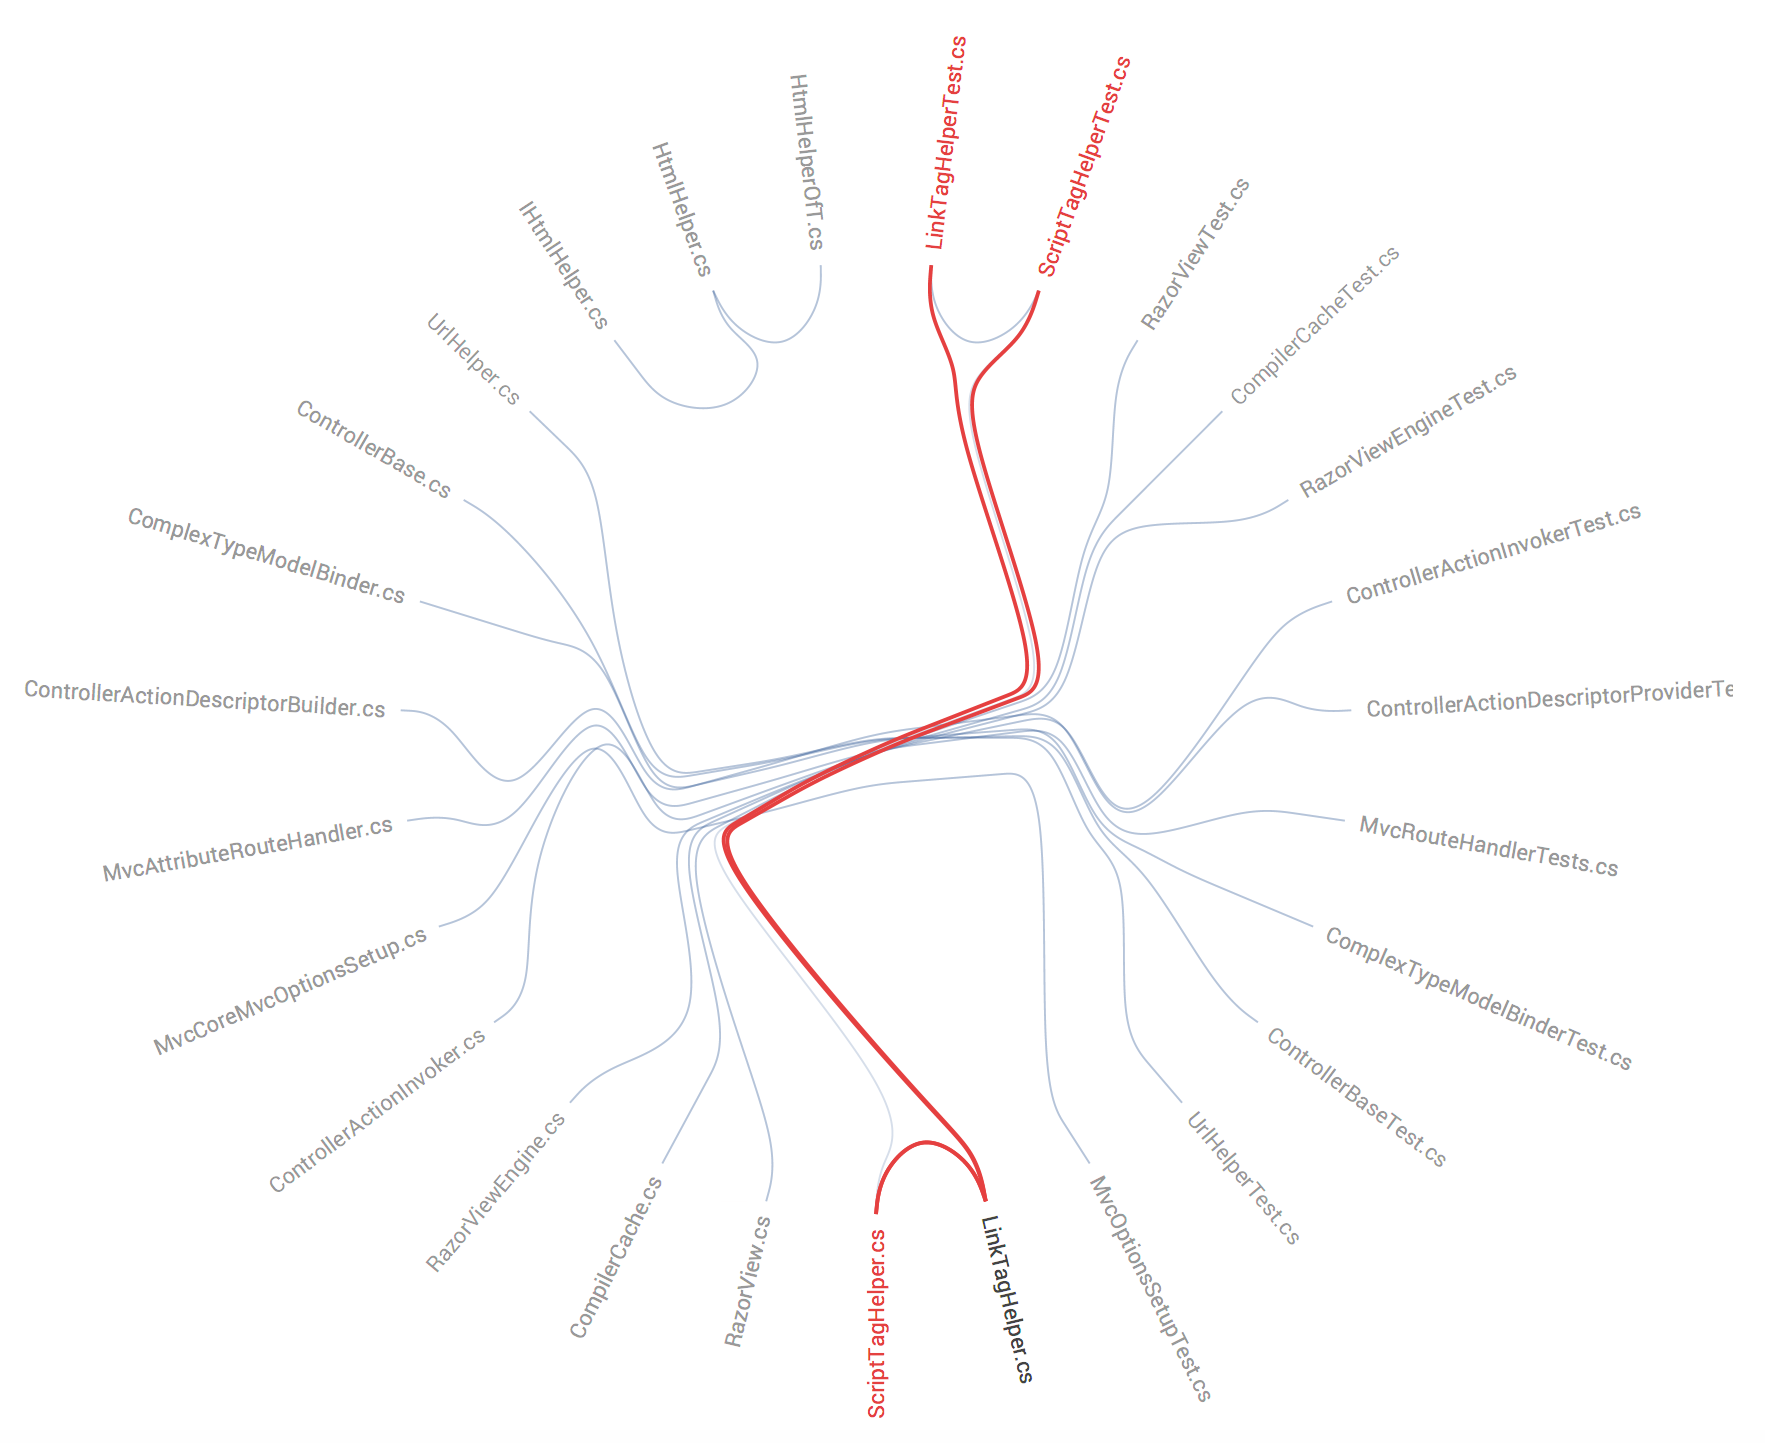 Unexpected change coupling visualization